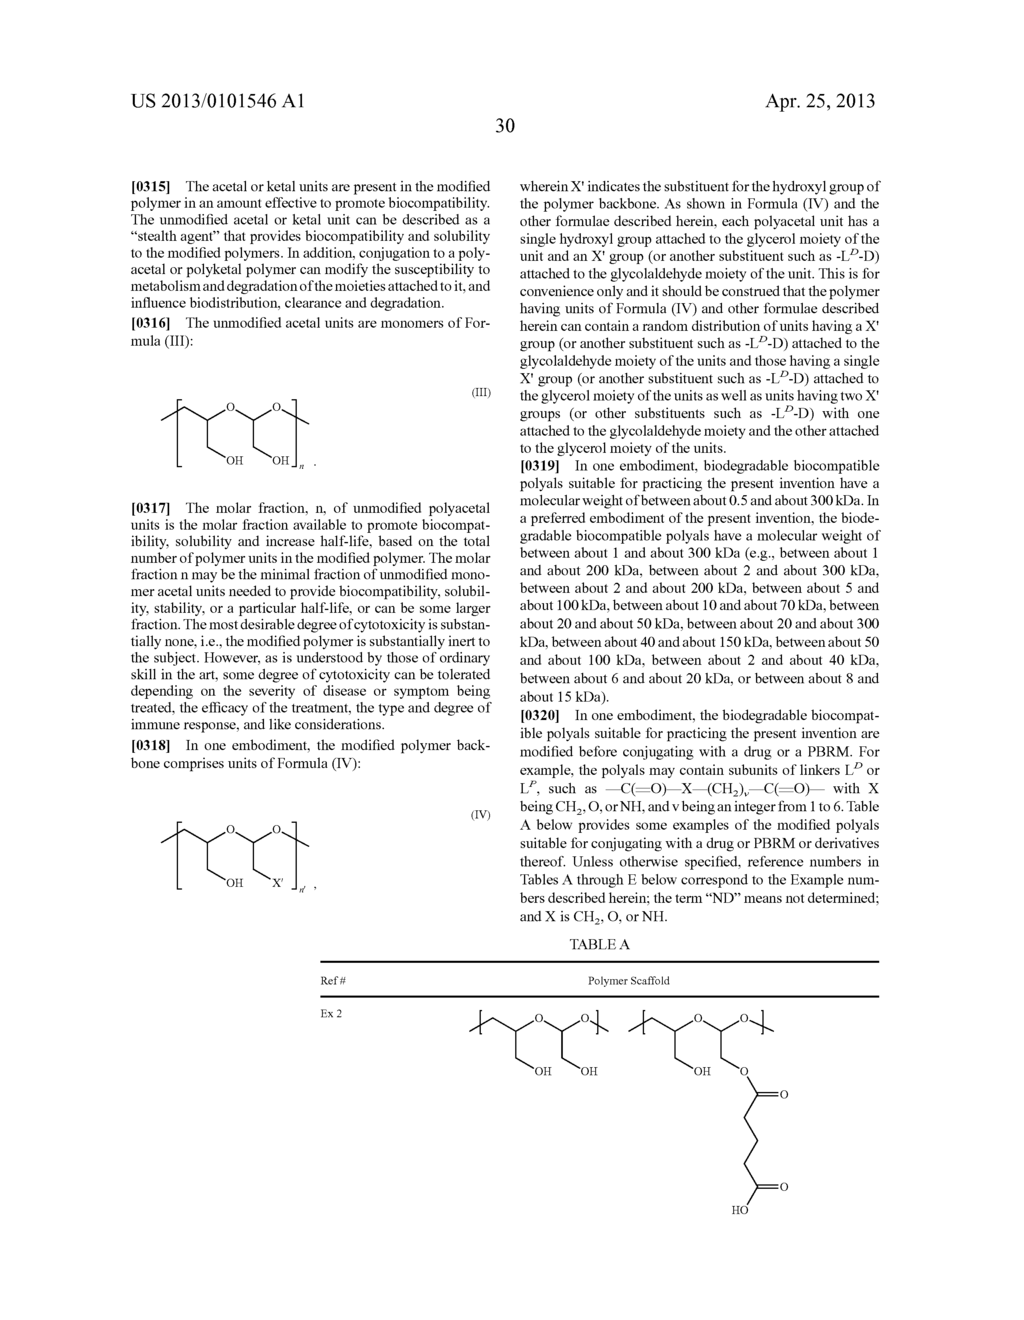 Protein-Polymer-Drug Conjugates - diagram, schematic, and image 41